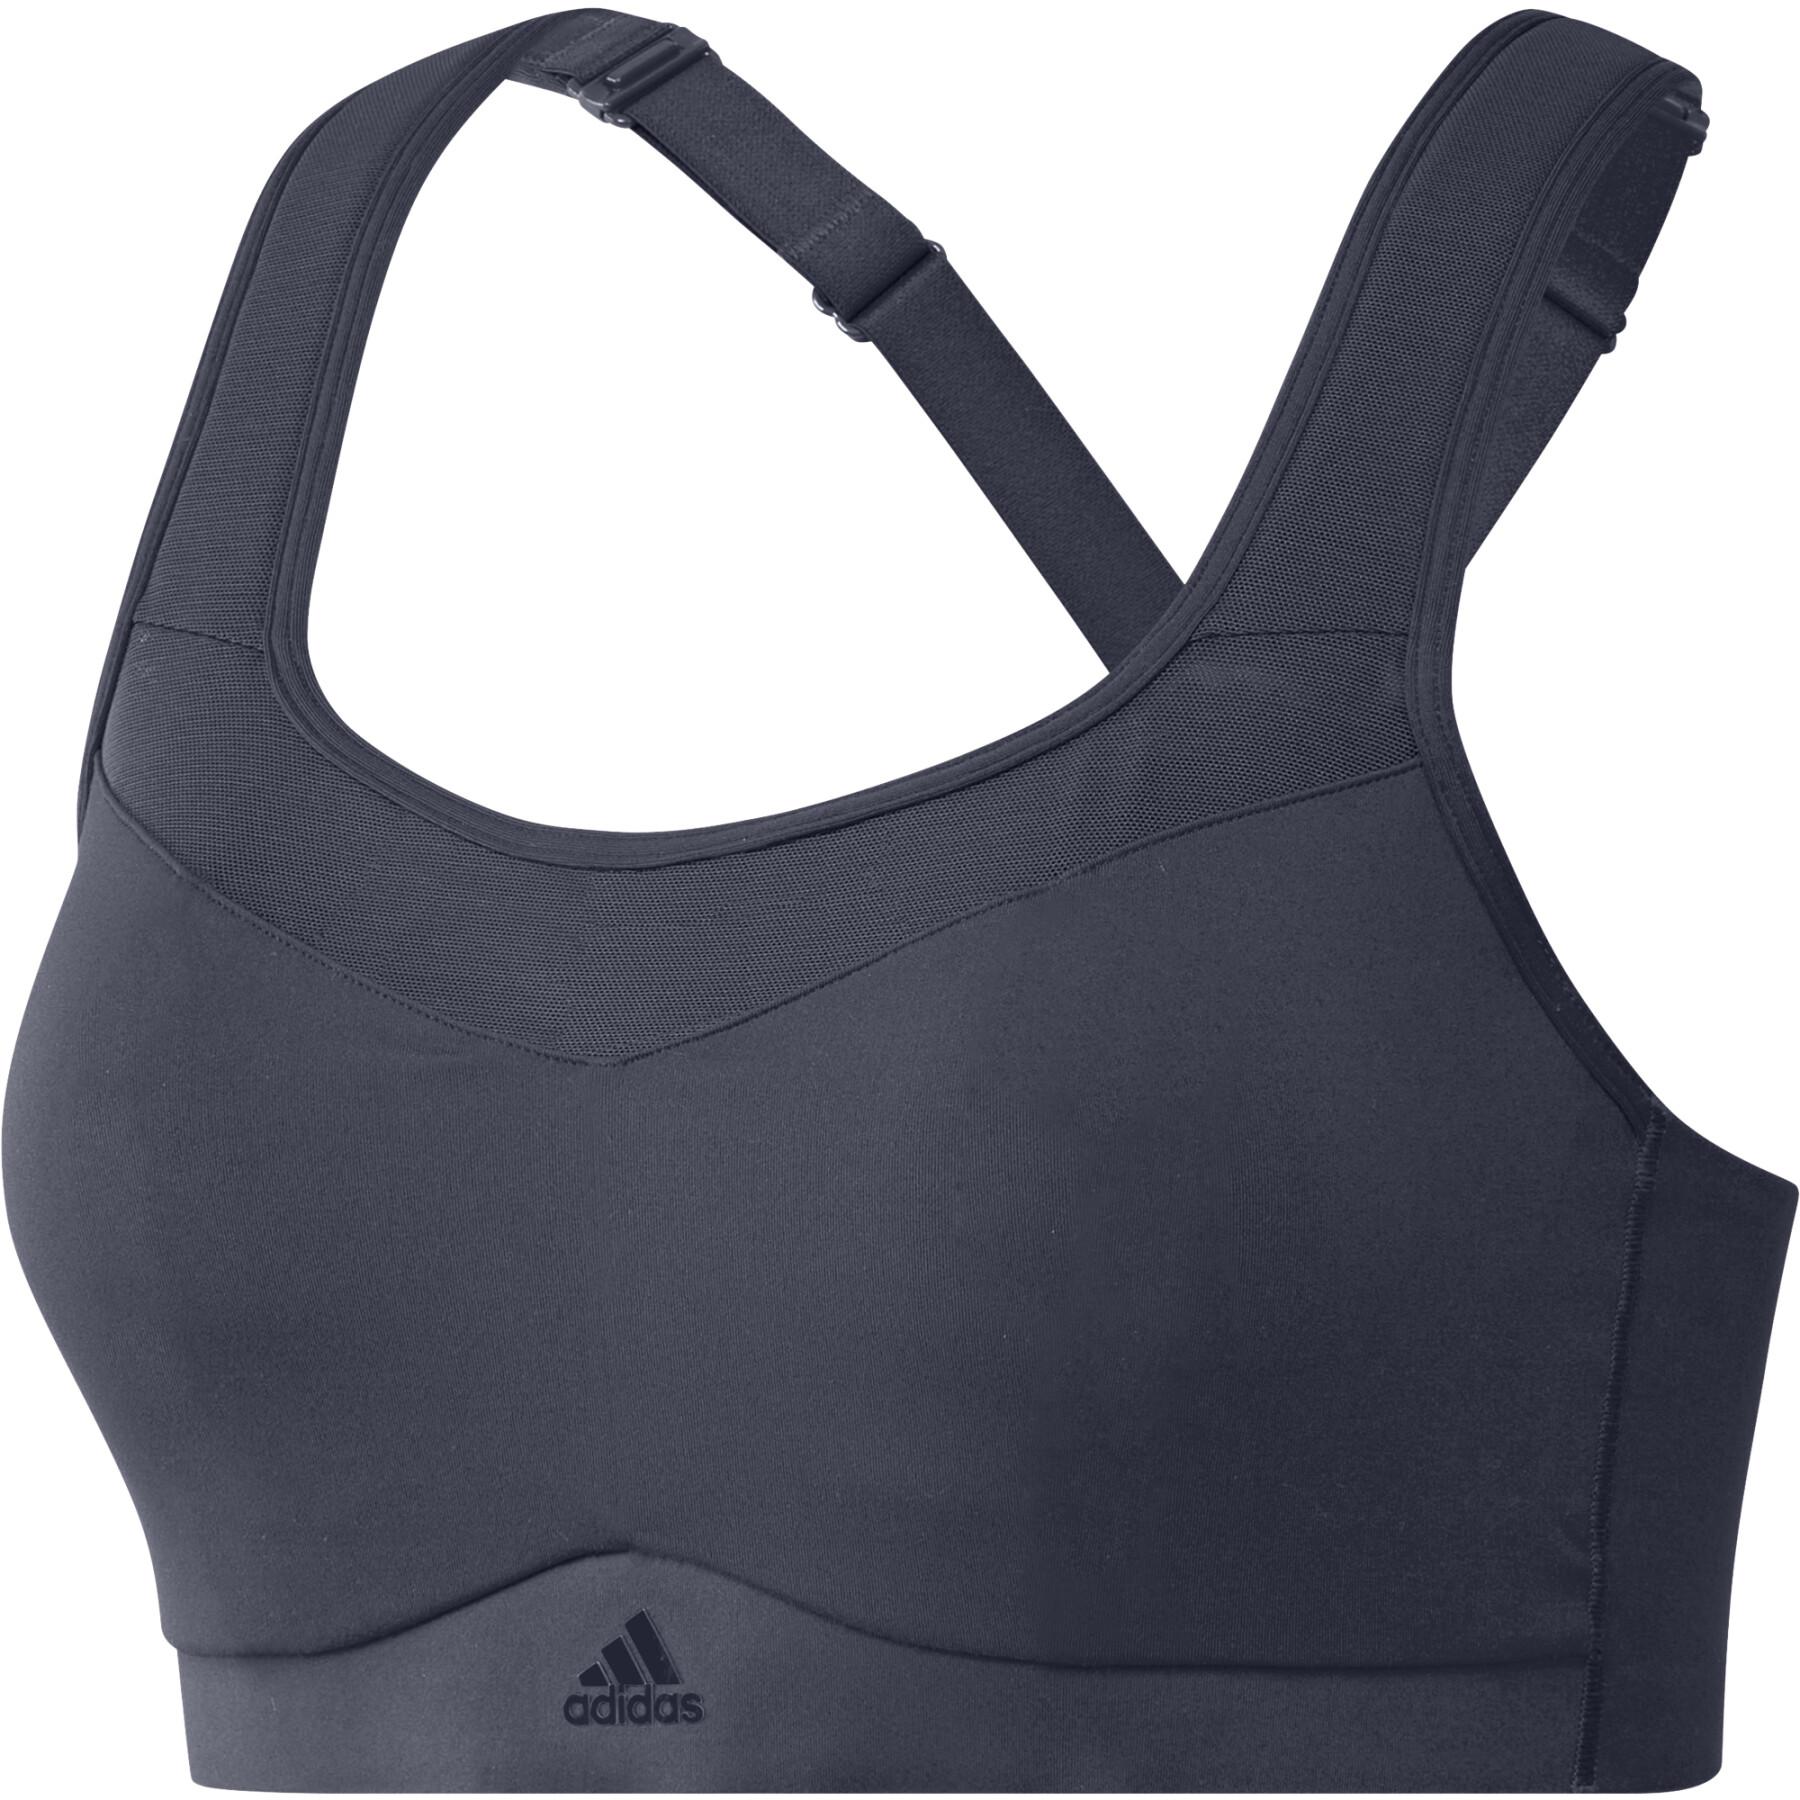 Women's bra adidas Tlrd Impact Training High-Support - Bras - Women's  clothing - Fitness